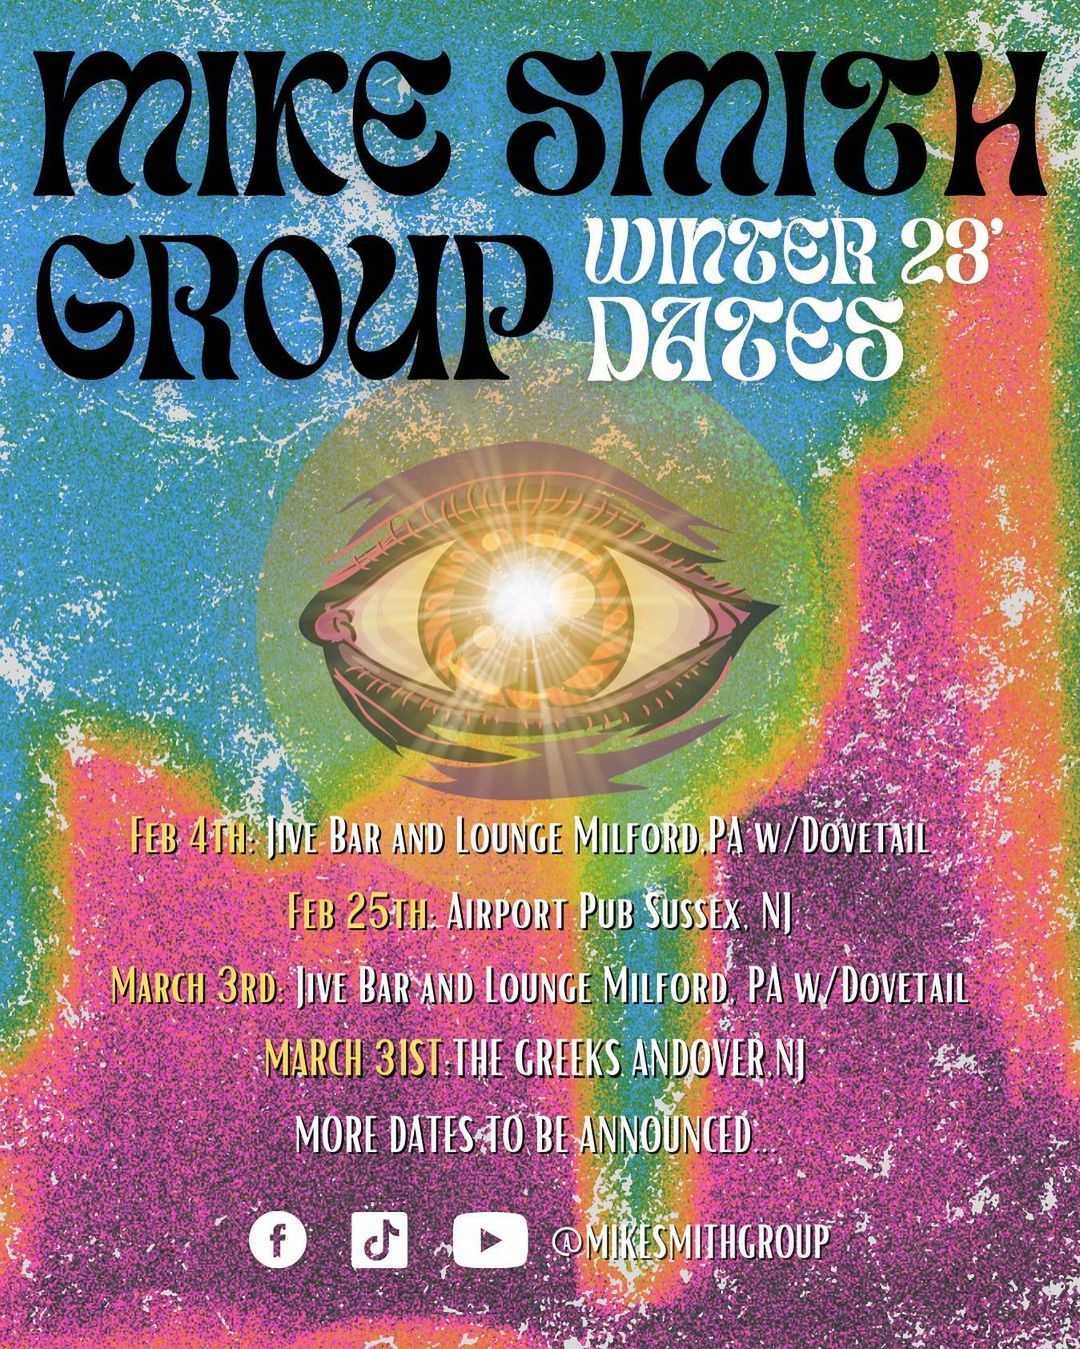 Mike Smith Group's 2023 Winter Tour Dates